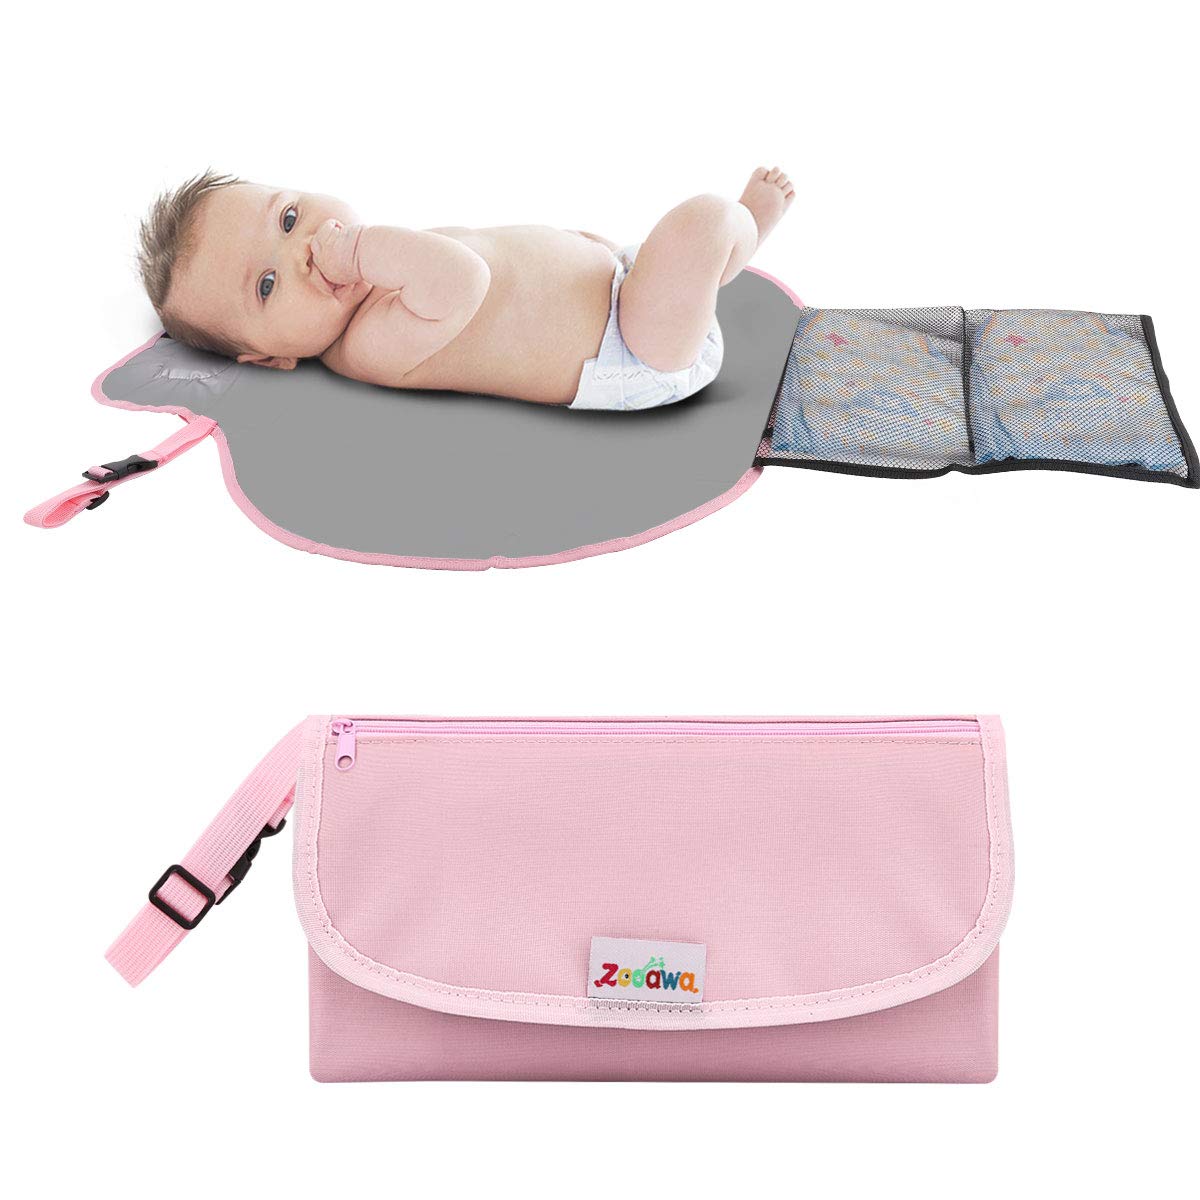 Zooawa Portable Diaper Changing Pad Mat Waterproof Folding Station Clutch Travel Carrying Bag for Baby Infants